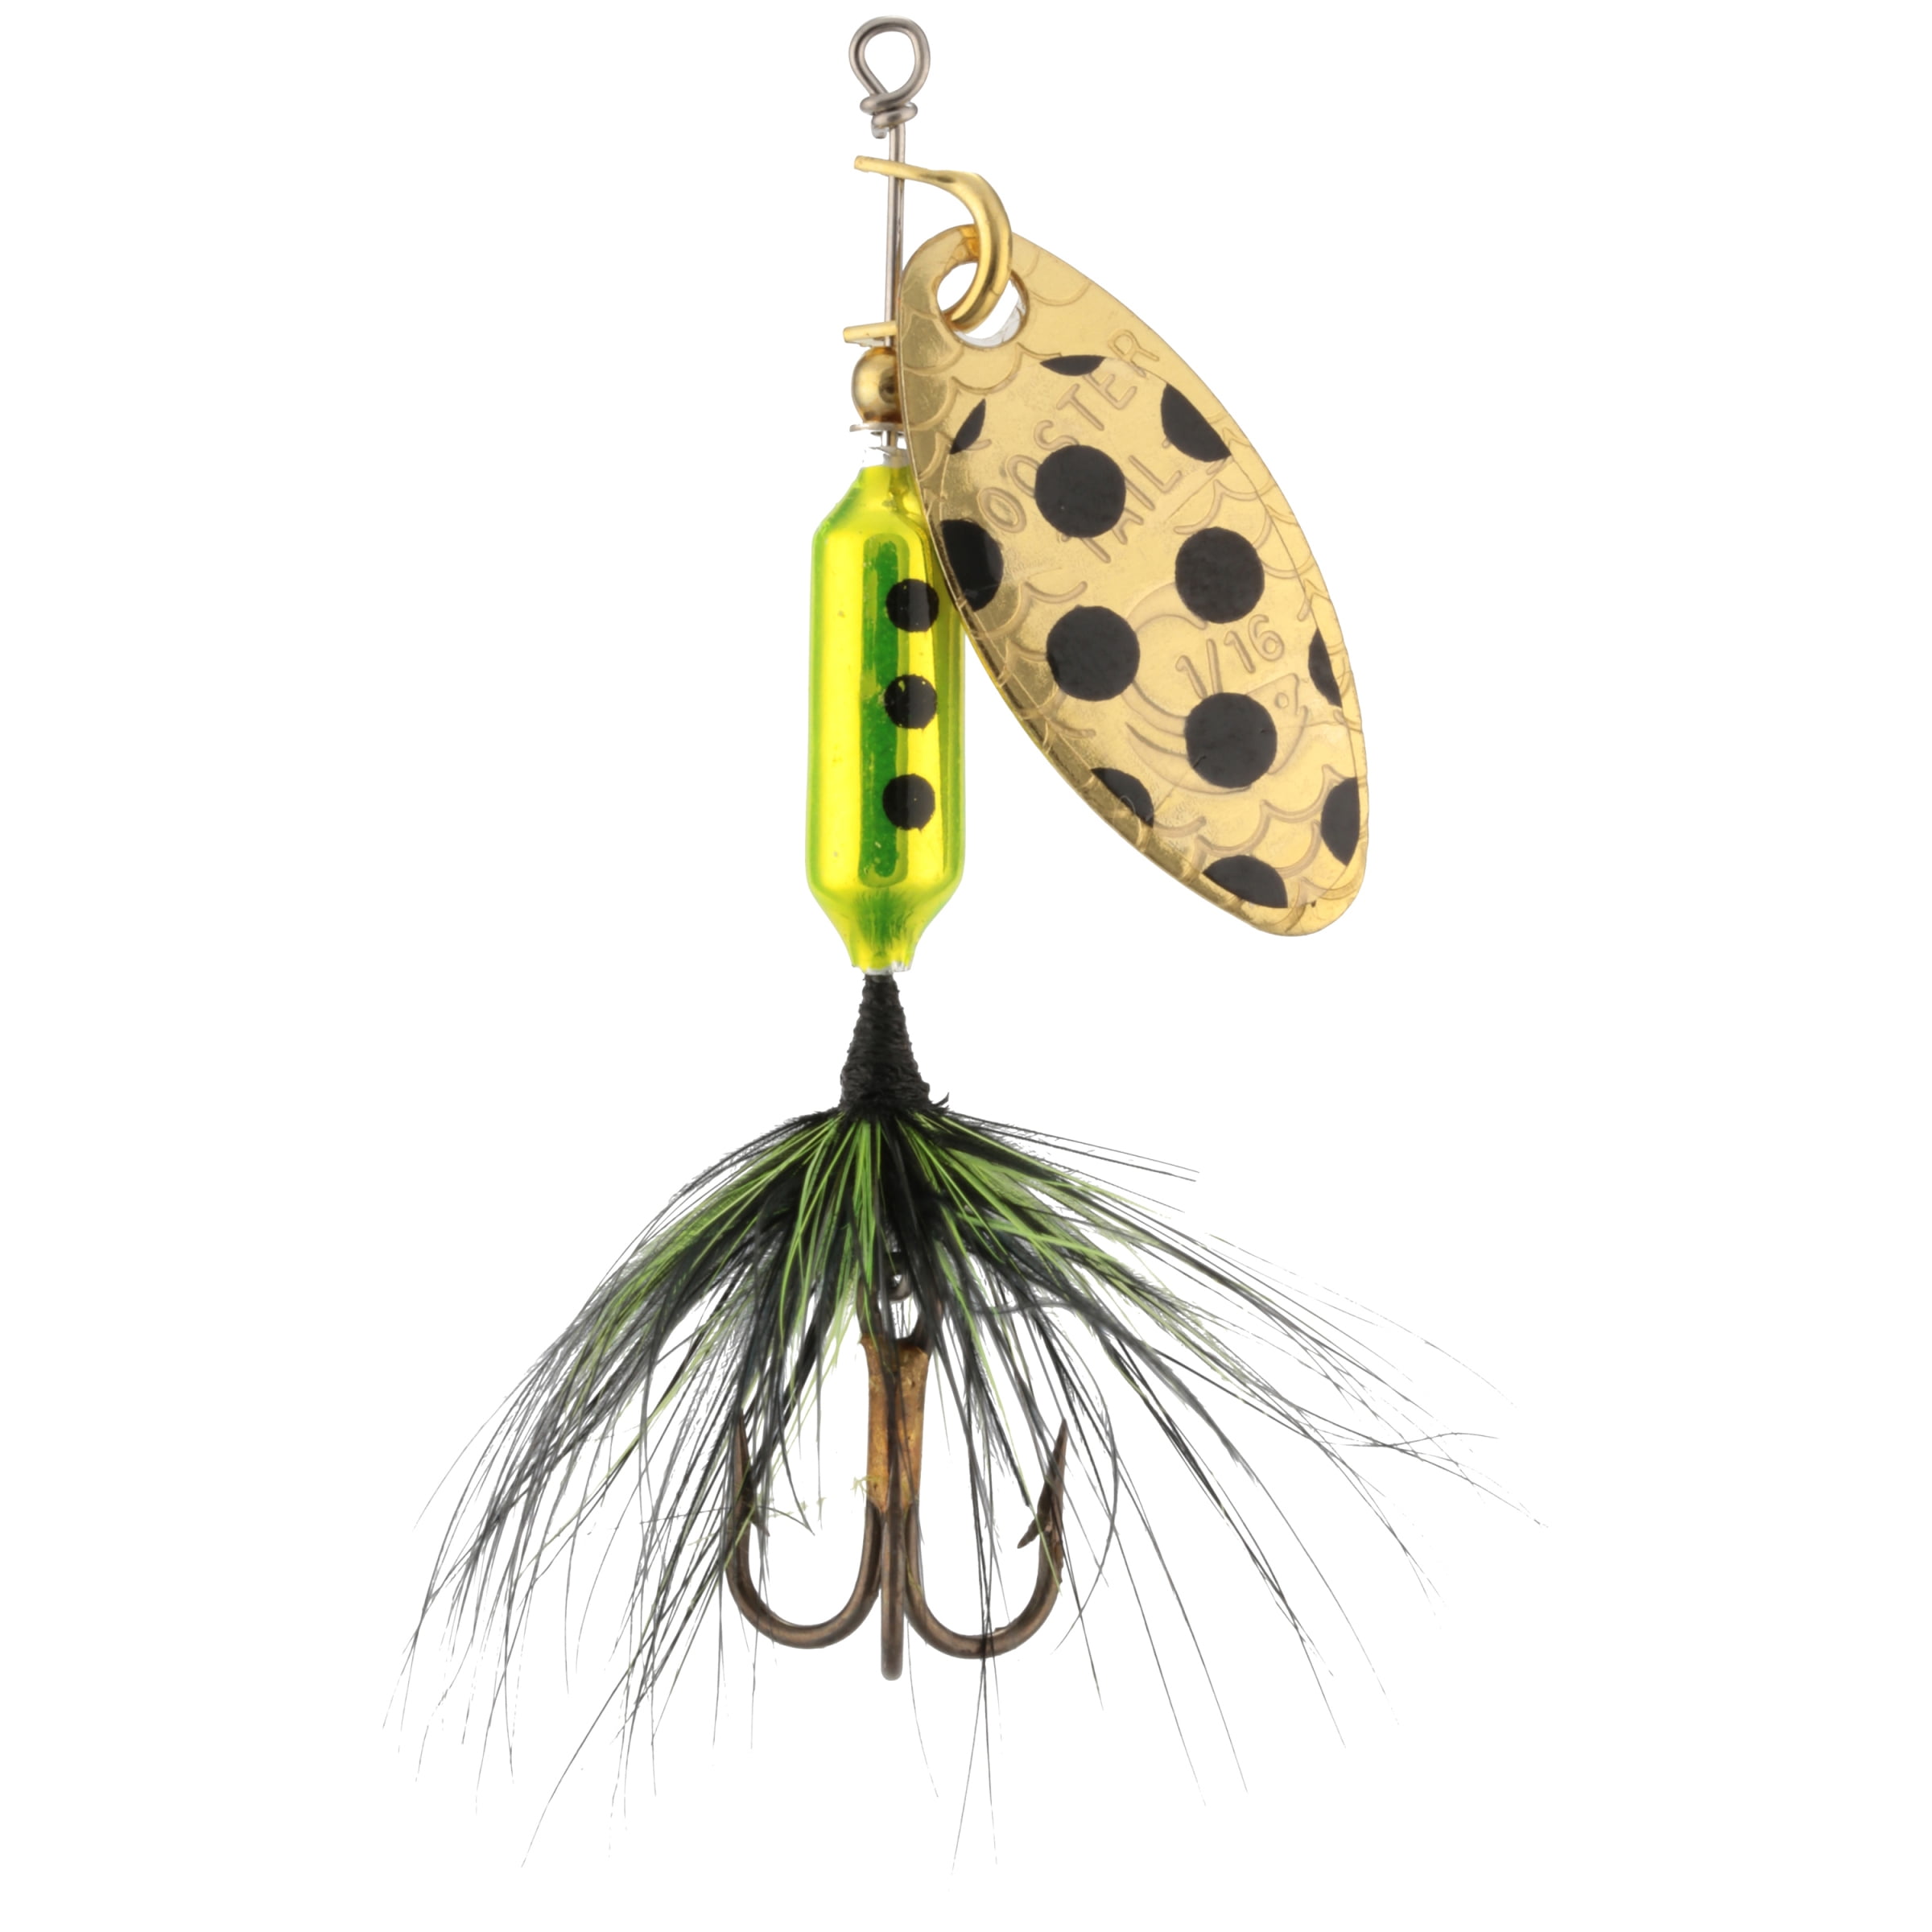 Worden's® Rooster Tail® Original Met Spot, Inline Spinnerbait Fishing Lure, 1/16  oz. Carded Pack 